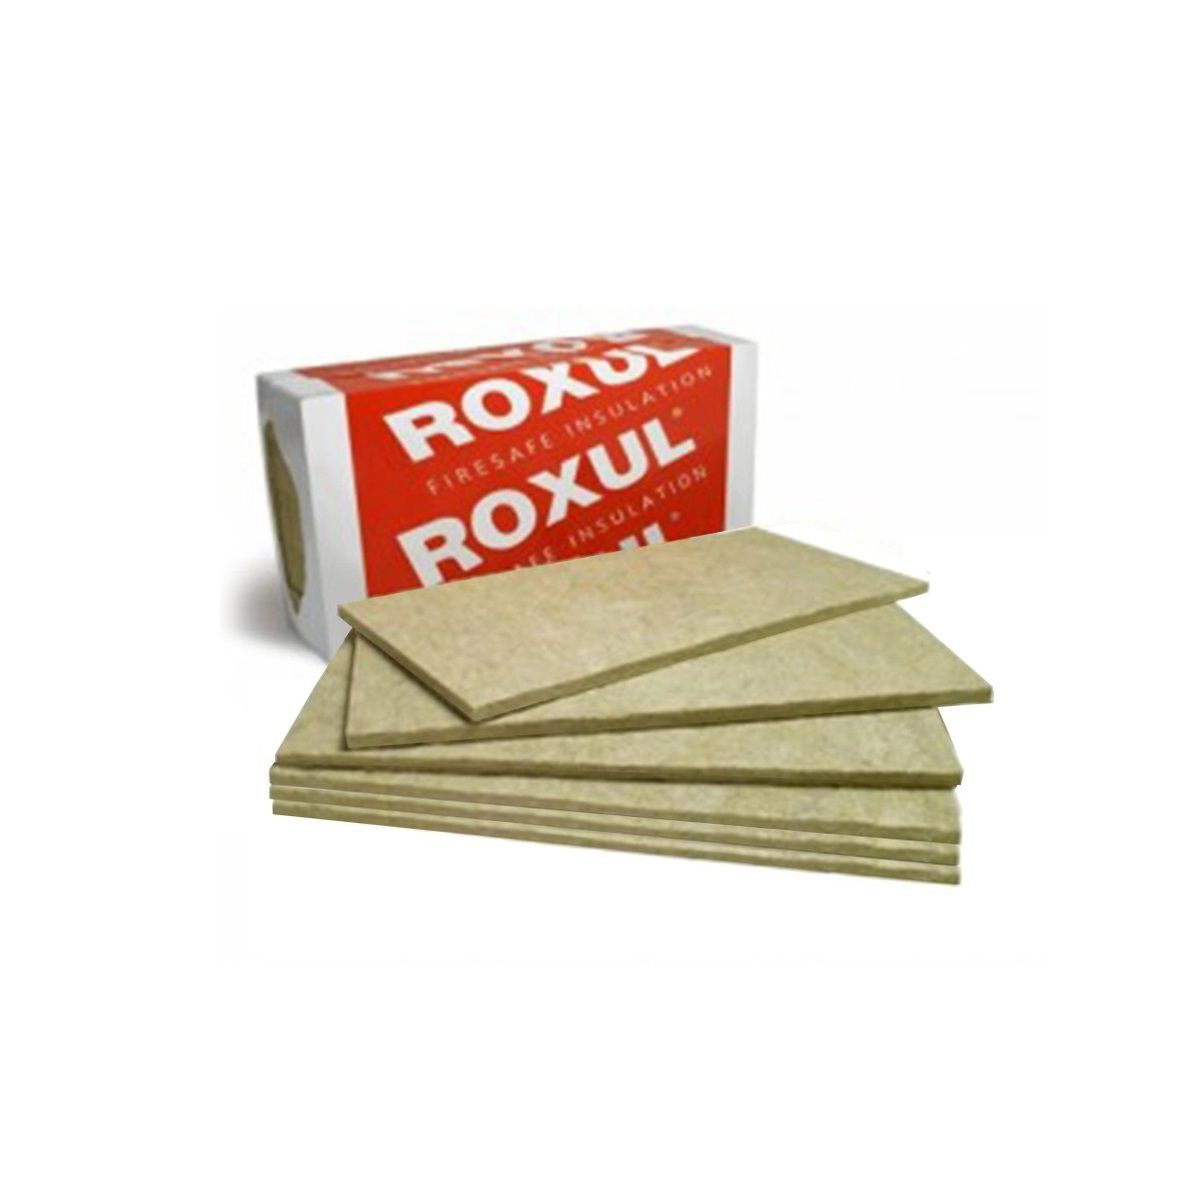 Roxul or Rockwool Fire Box Insulation- 1.5 inch thick